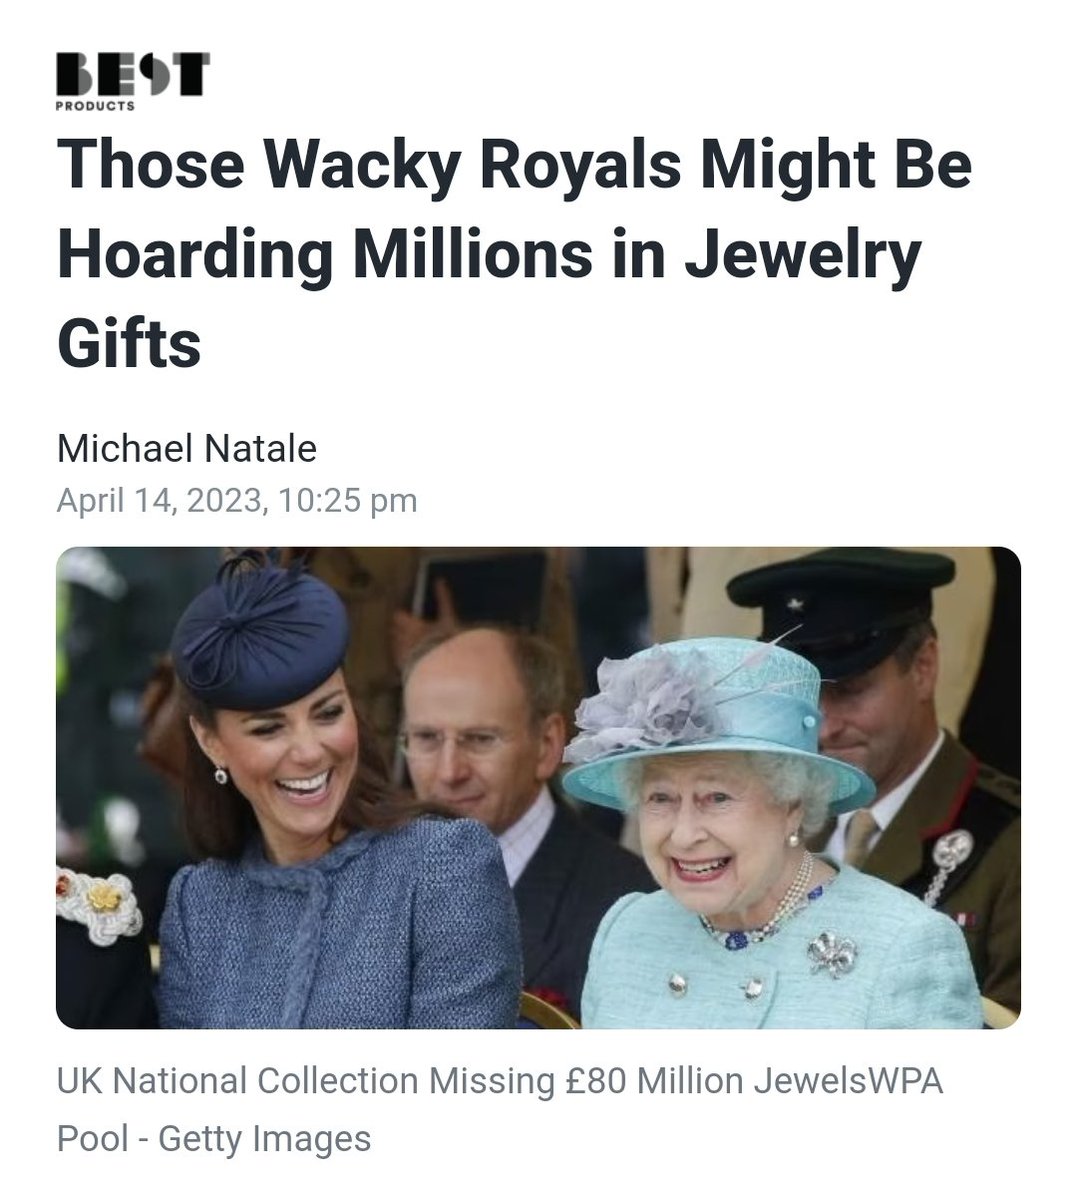 ( #Meghanmarkle #PrinceHarry)

Roughly £80 million in official gifts 
are reportedly not where they're supposed to be. 👇🏼

£80 million jewellery gifts missing from royal family collection.

#KateWhereAreTheJeweliers
#MissingJewellery
#StolenJewellery 

sports.yahoo.com/those-wacky-ro…